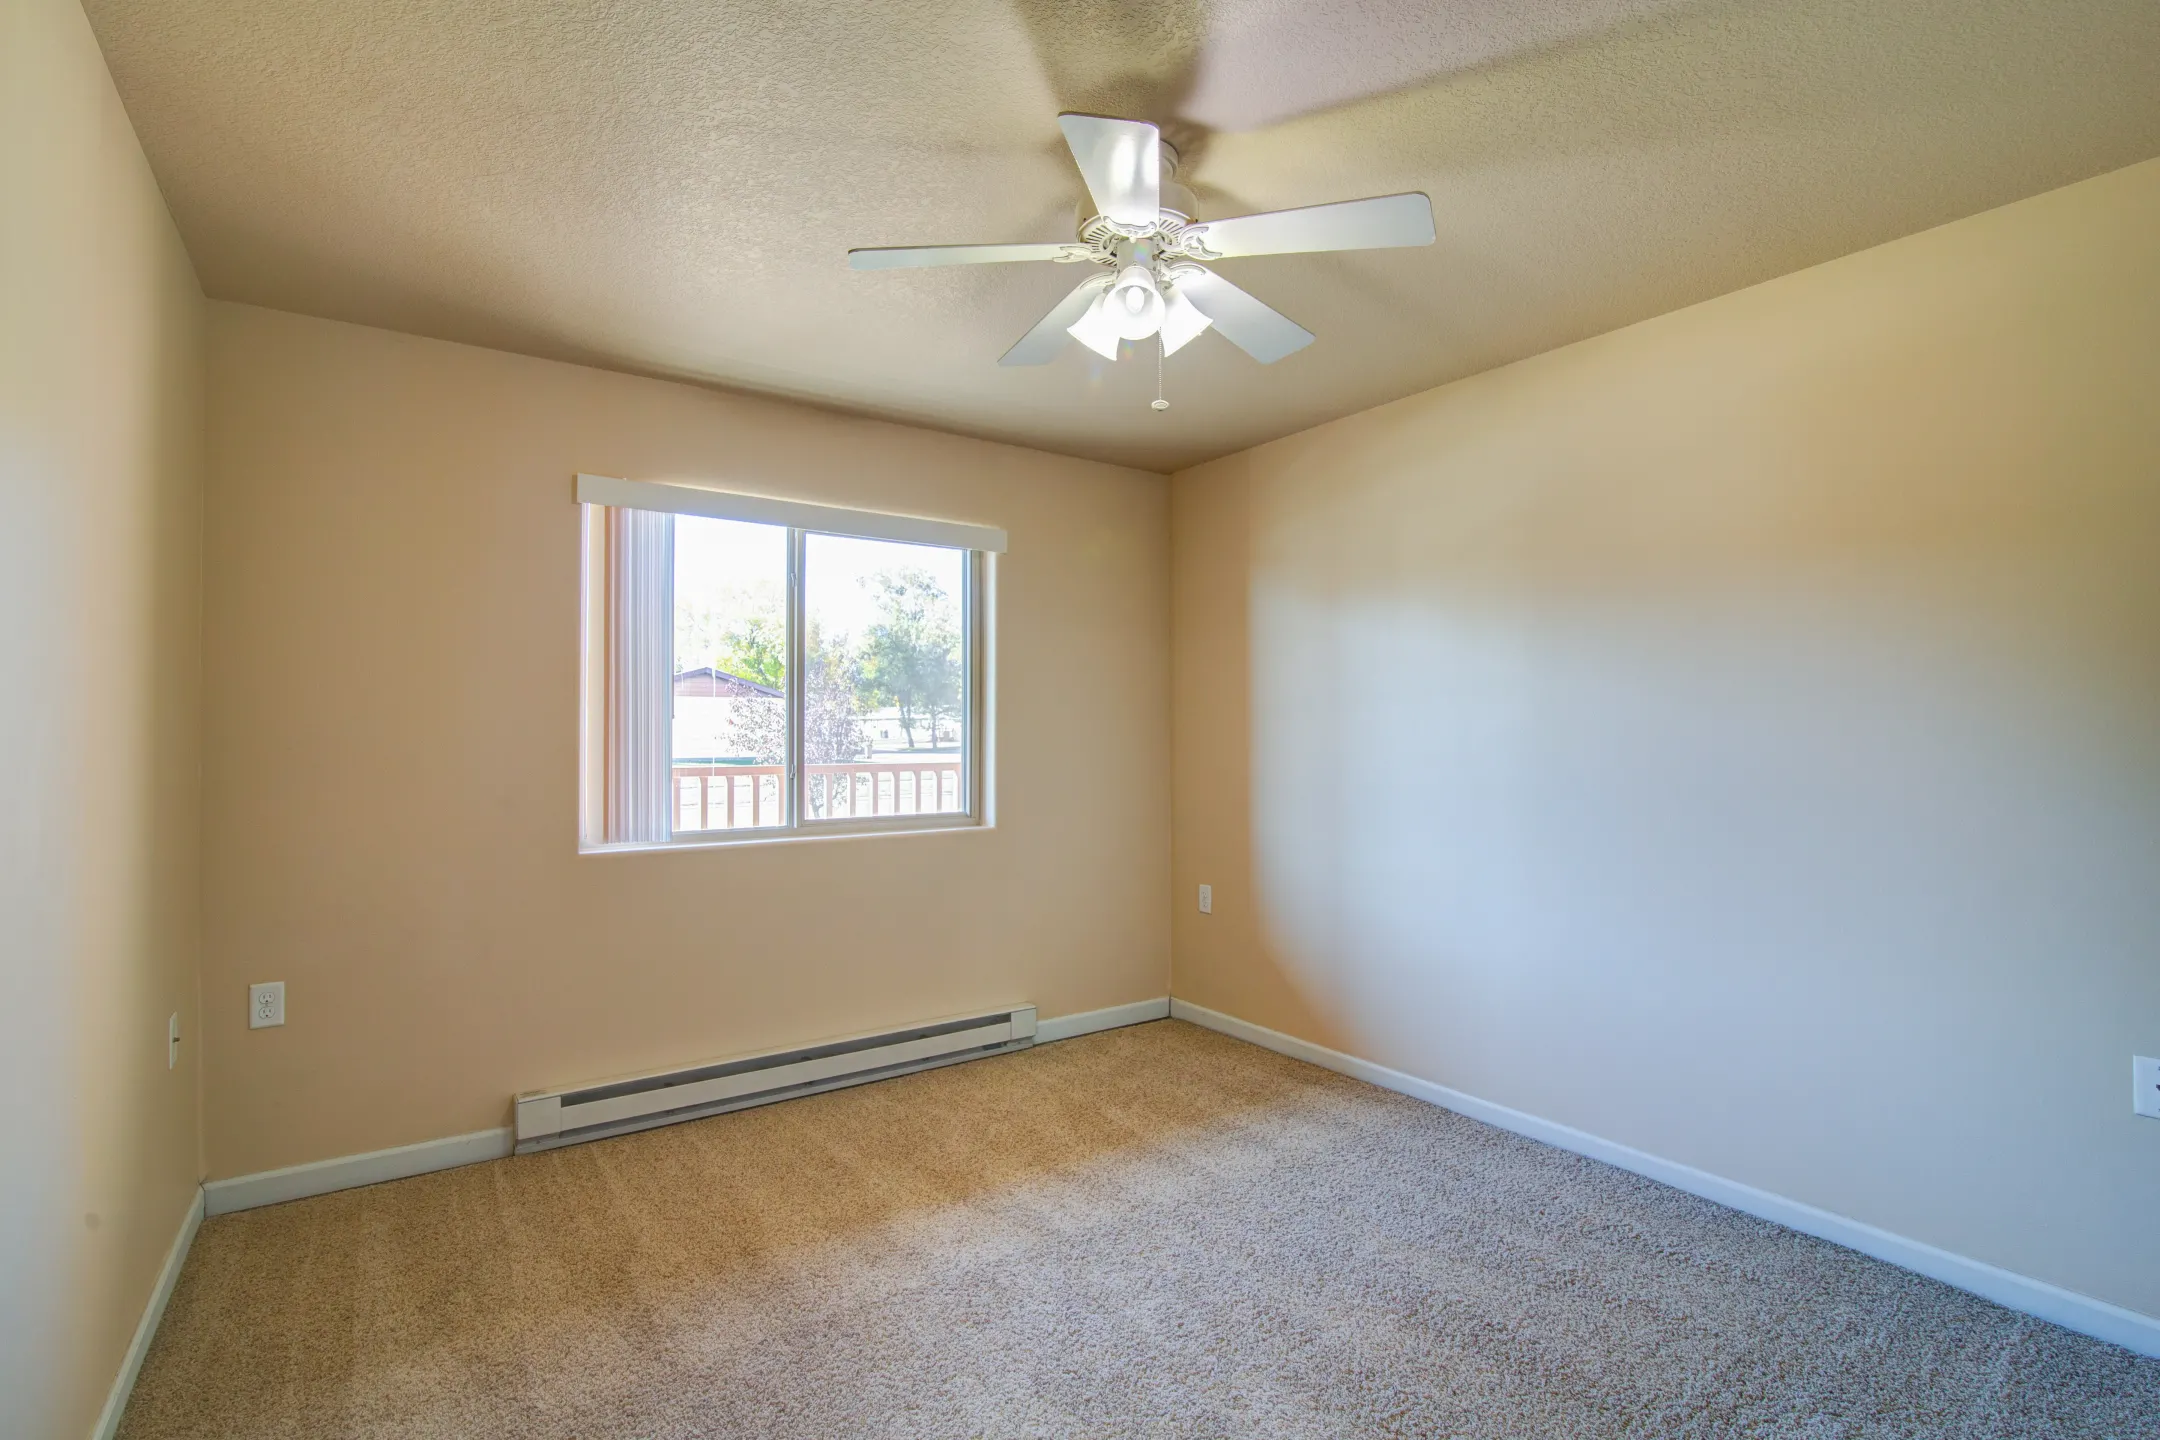 Bedroom - Northdale Apartments - Minot, ND